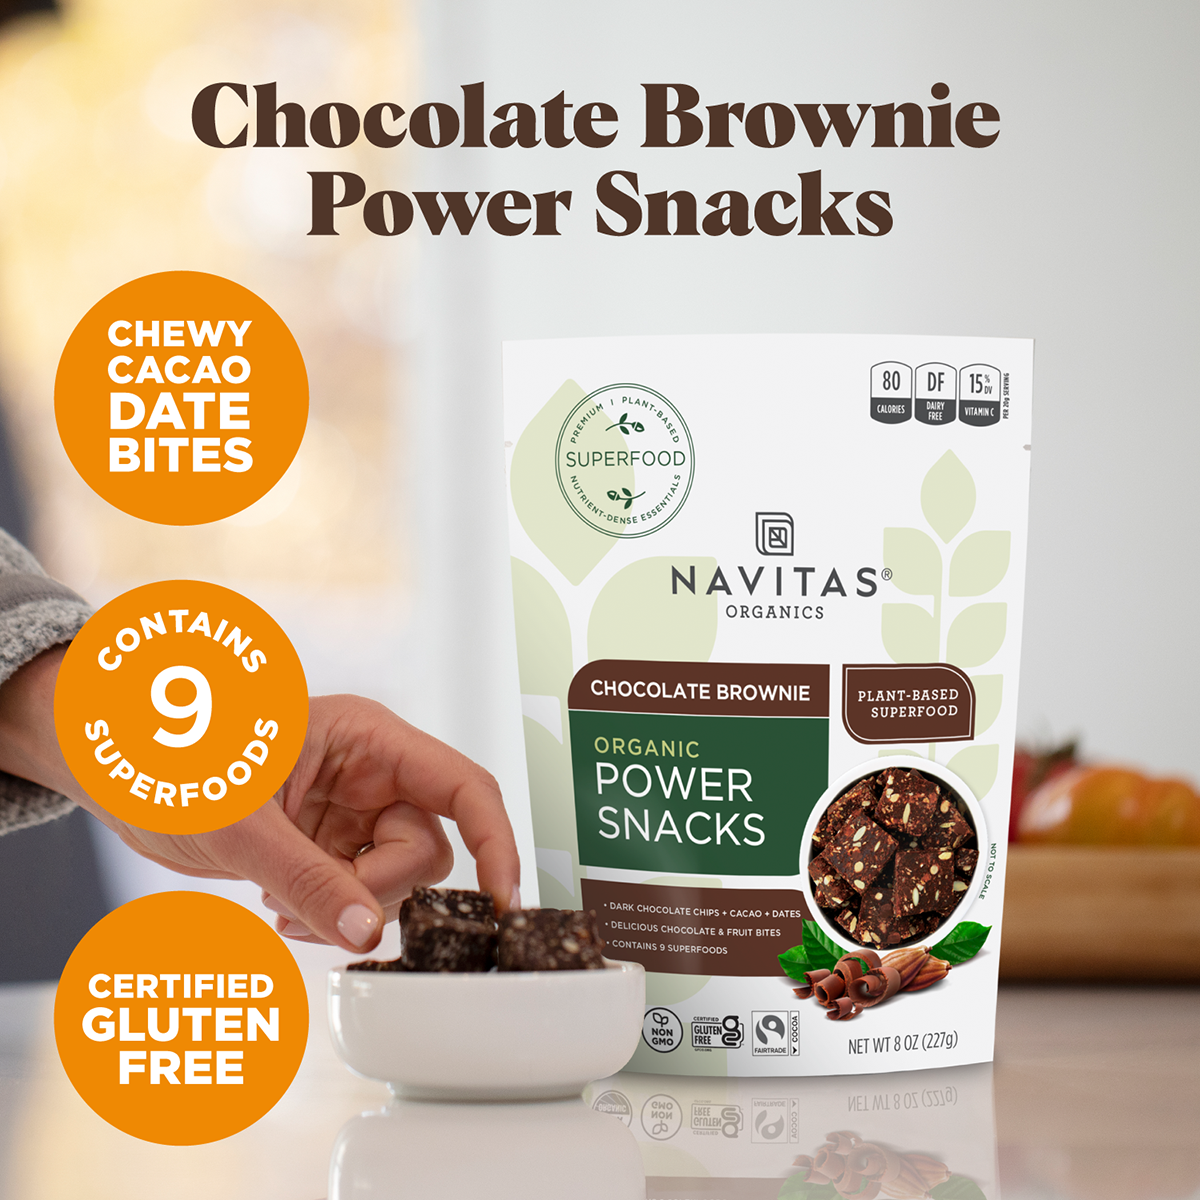 Chocolate Brownie Power Snacks are chewy cacao date bites with 9 superfoods and are certified gluten-free.